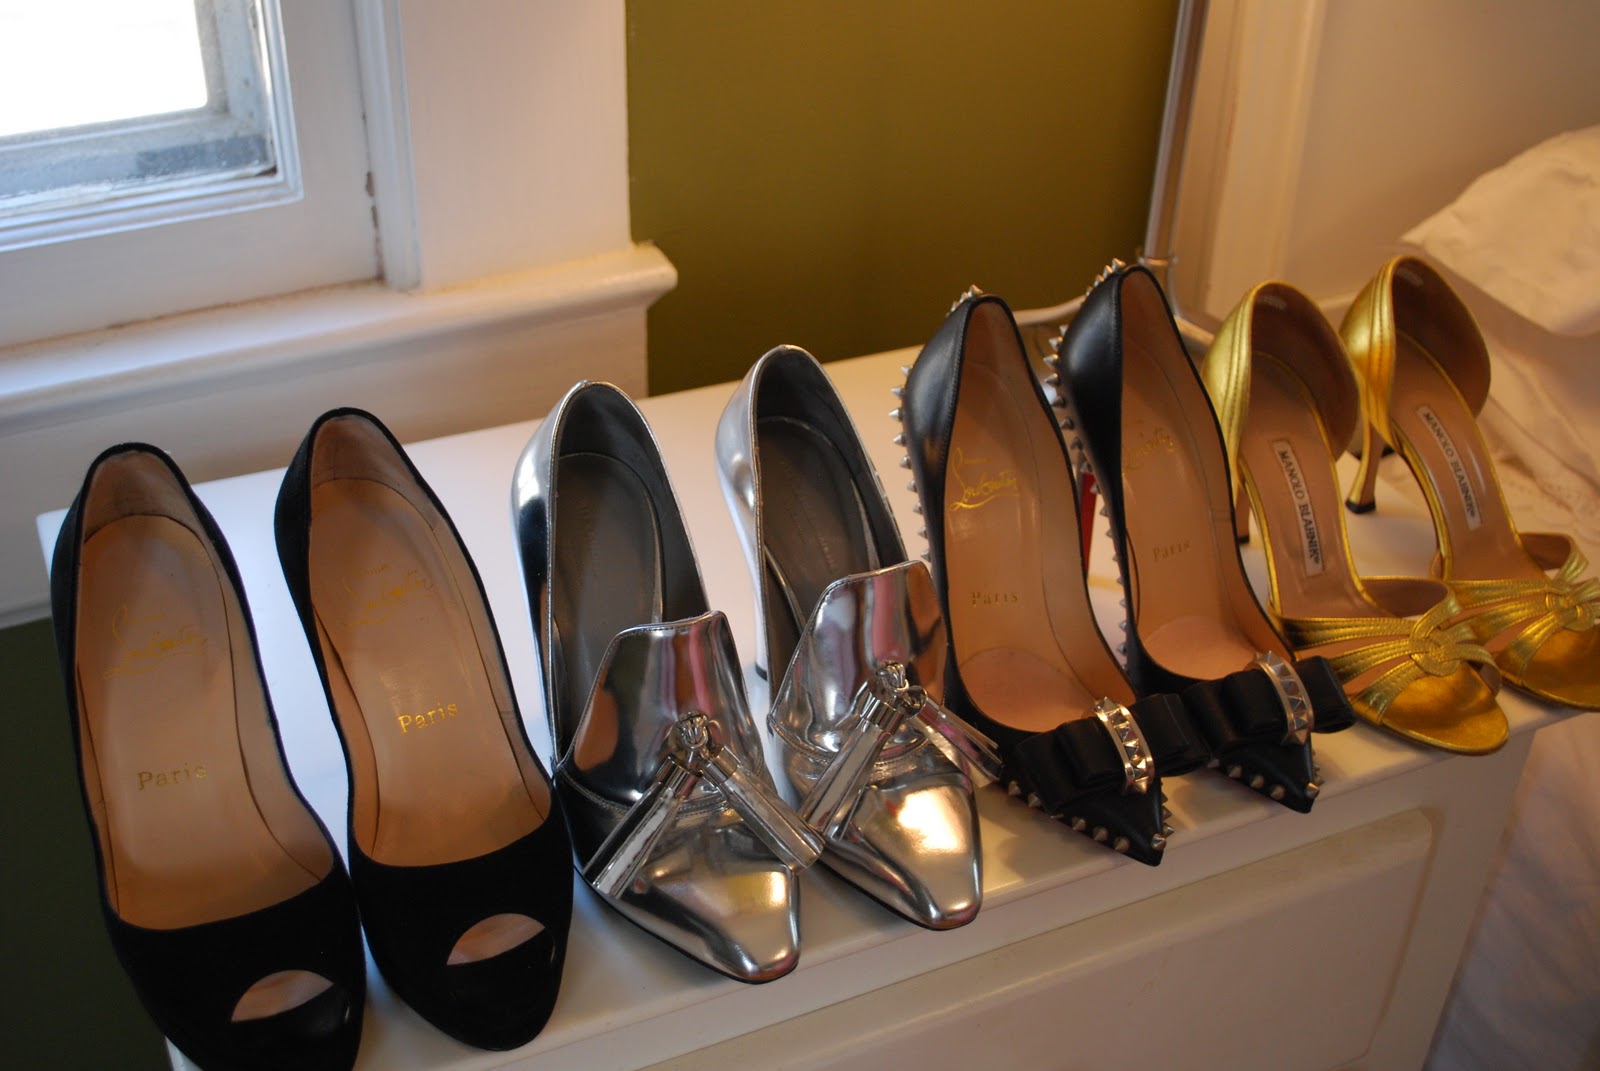 Shoe Daydreams: What Would You Pair?